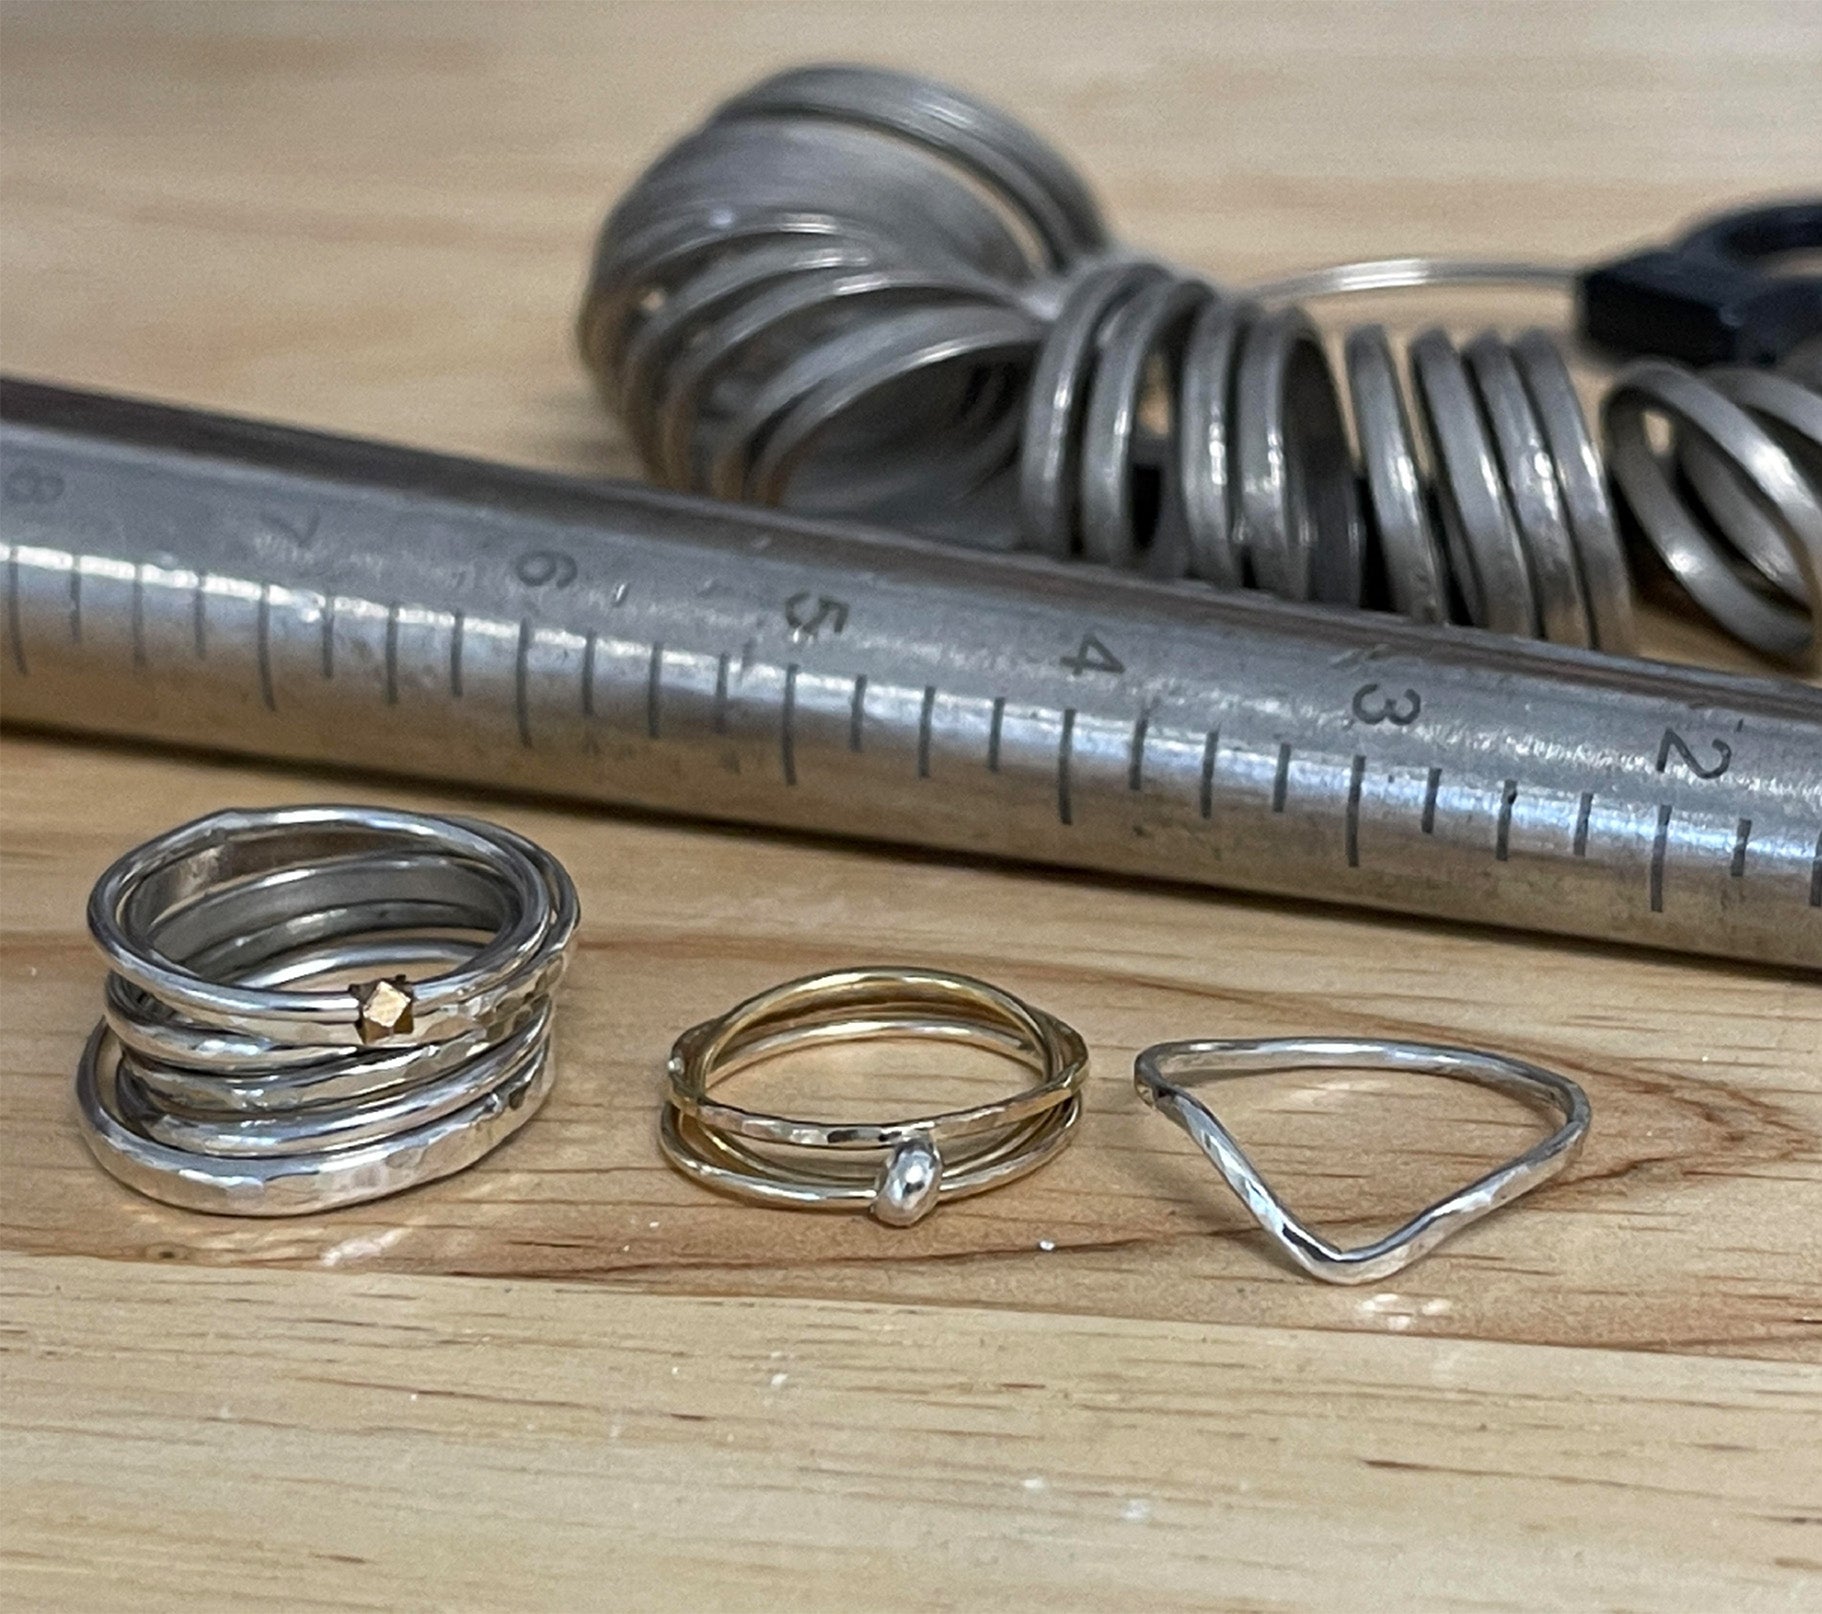 Heart Hammered Rings @ Wyld Collective